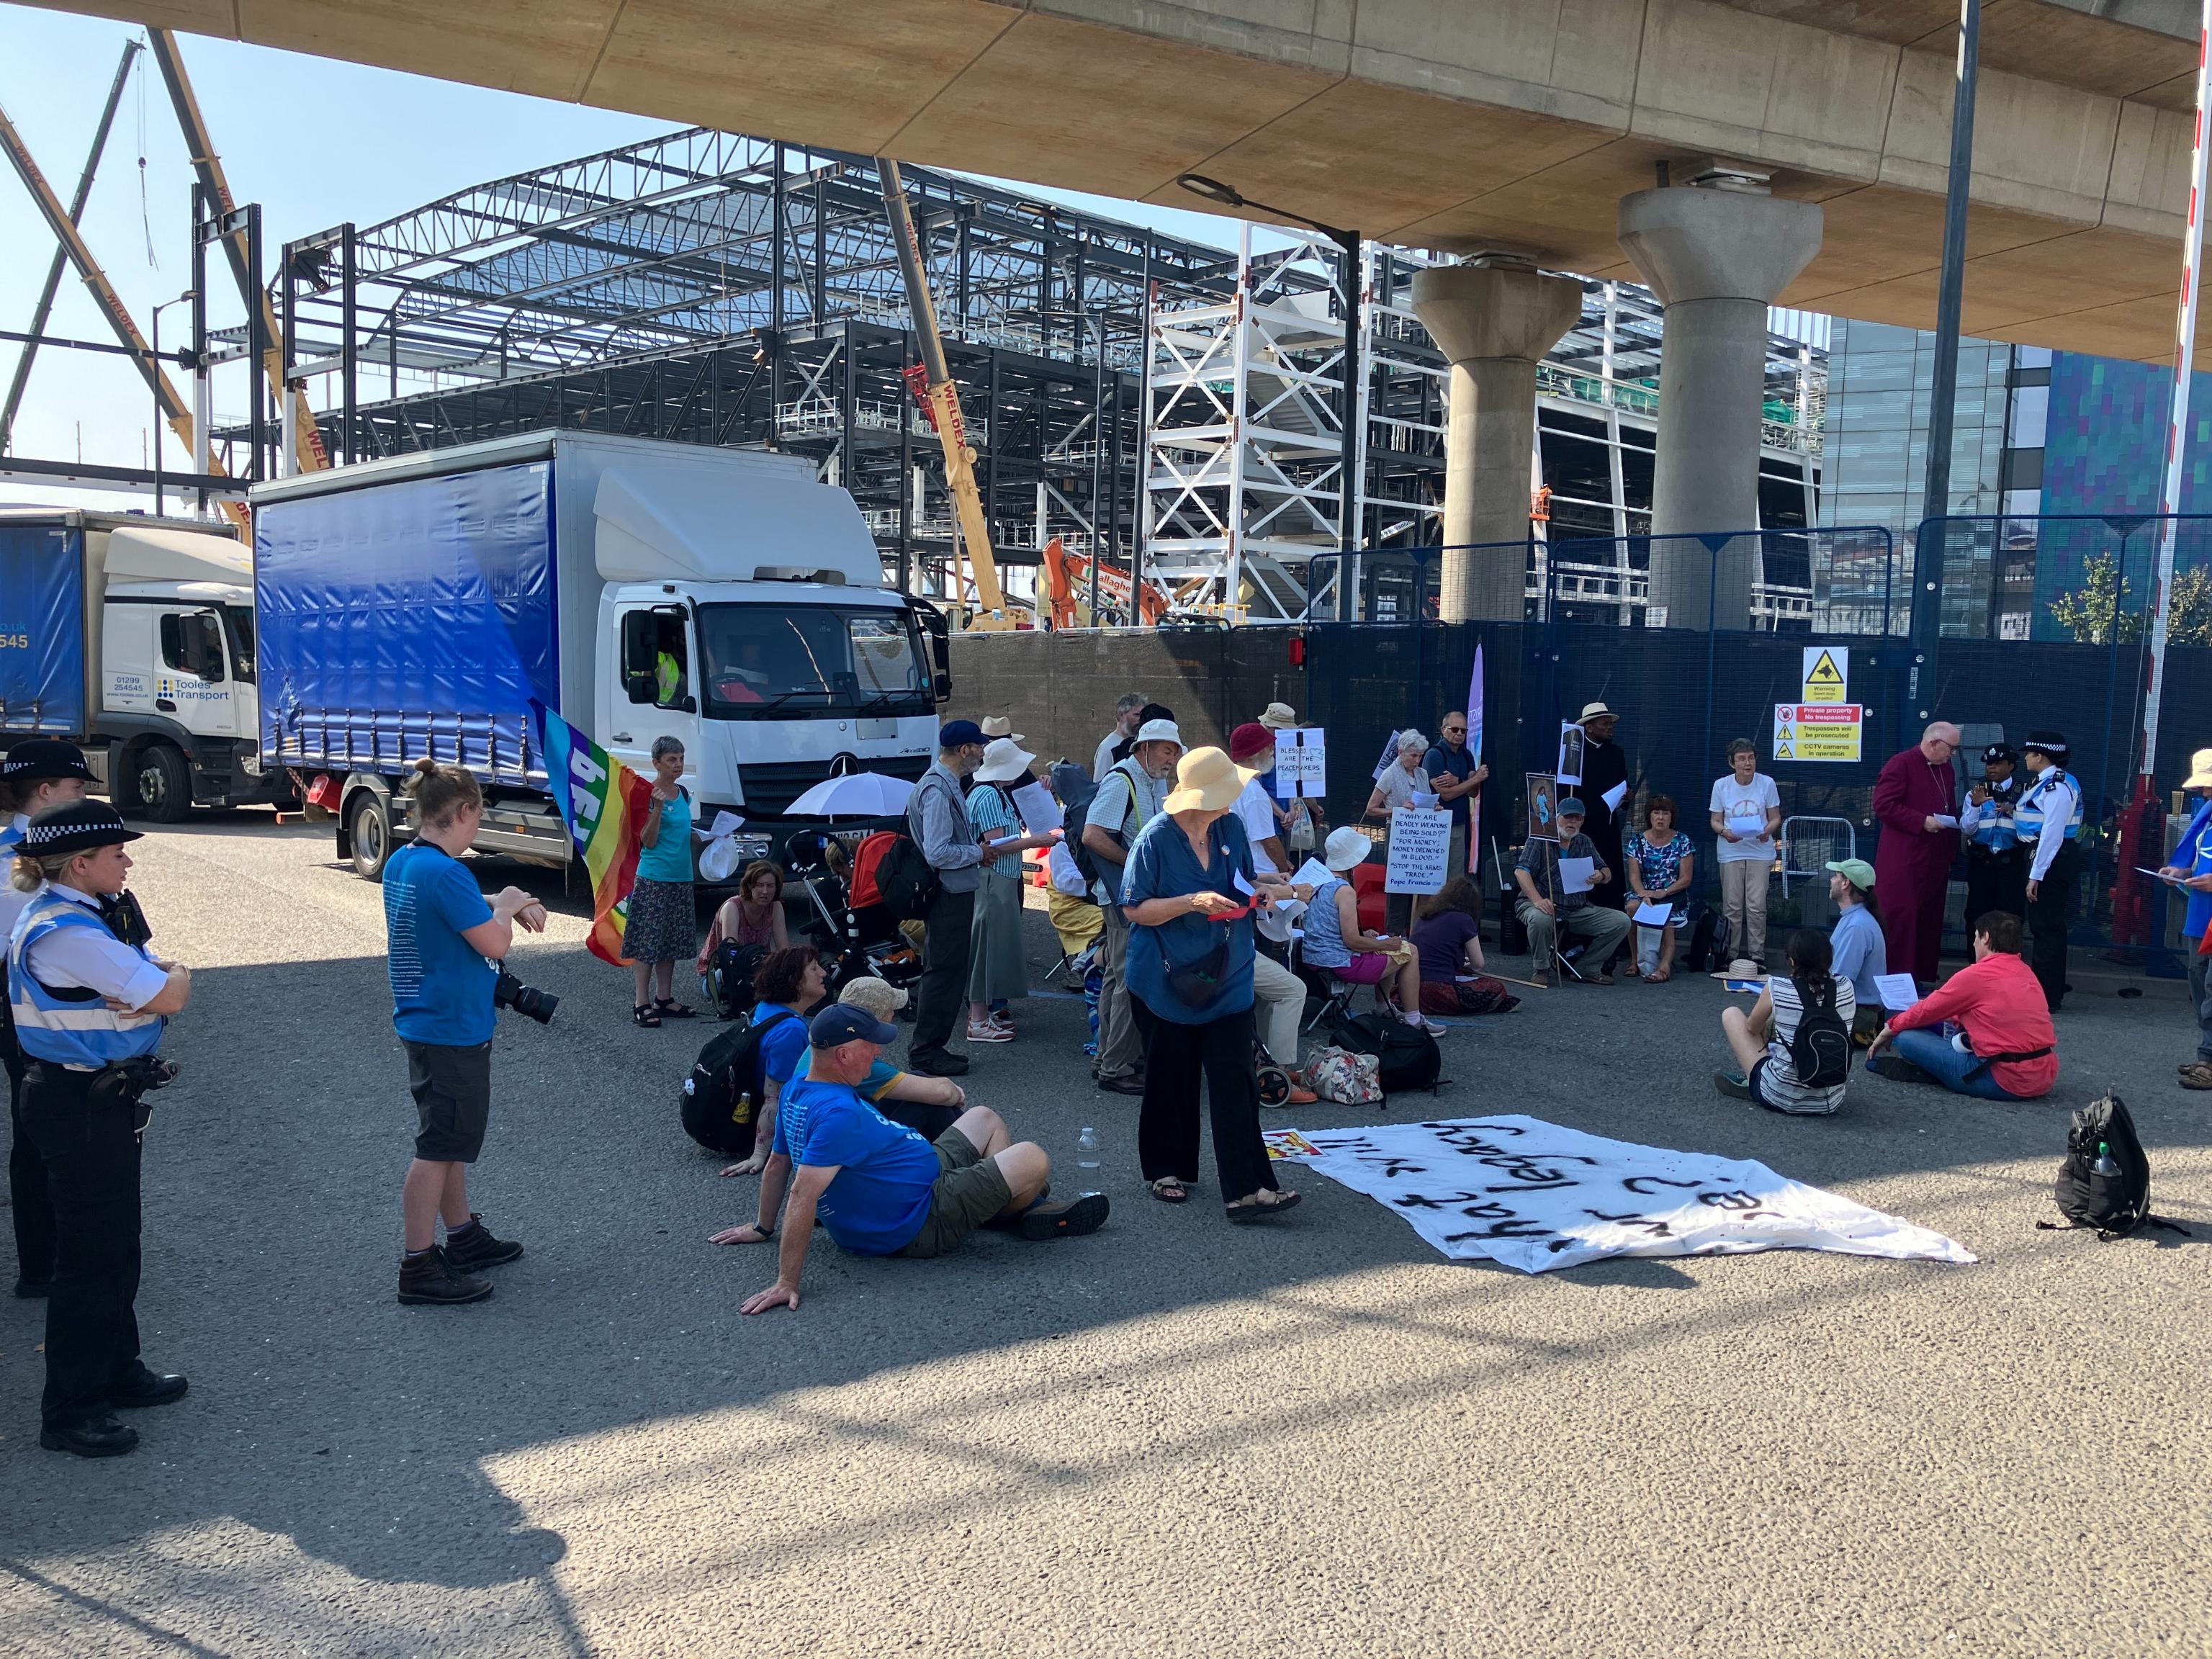 Protesters sitting in road under bridge as arms trade trucks wait going nowhere